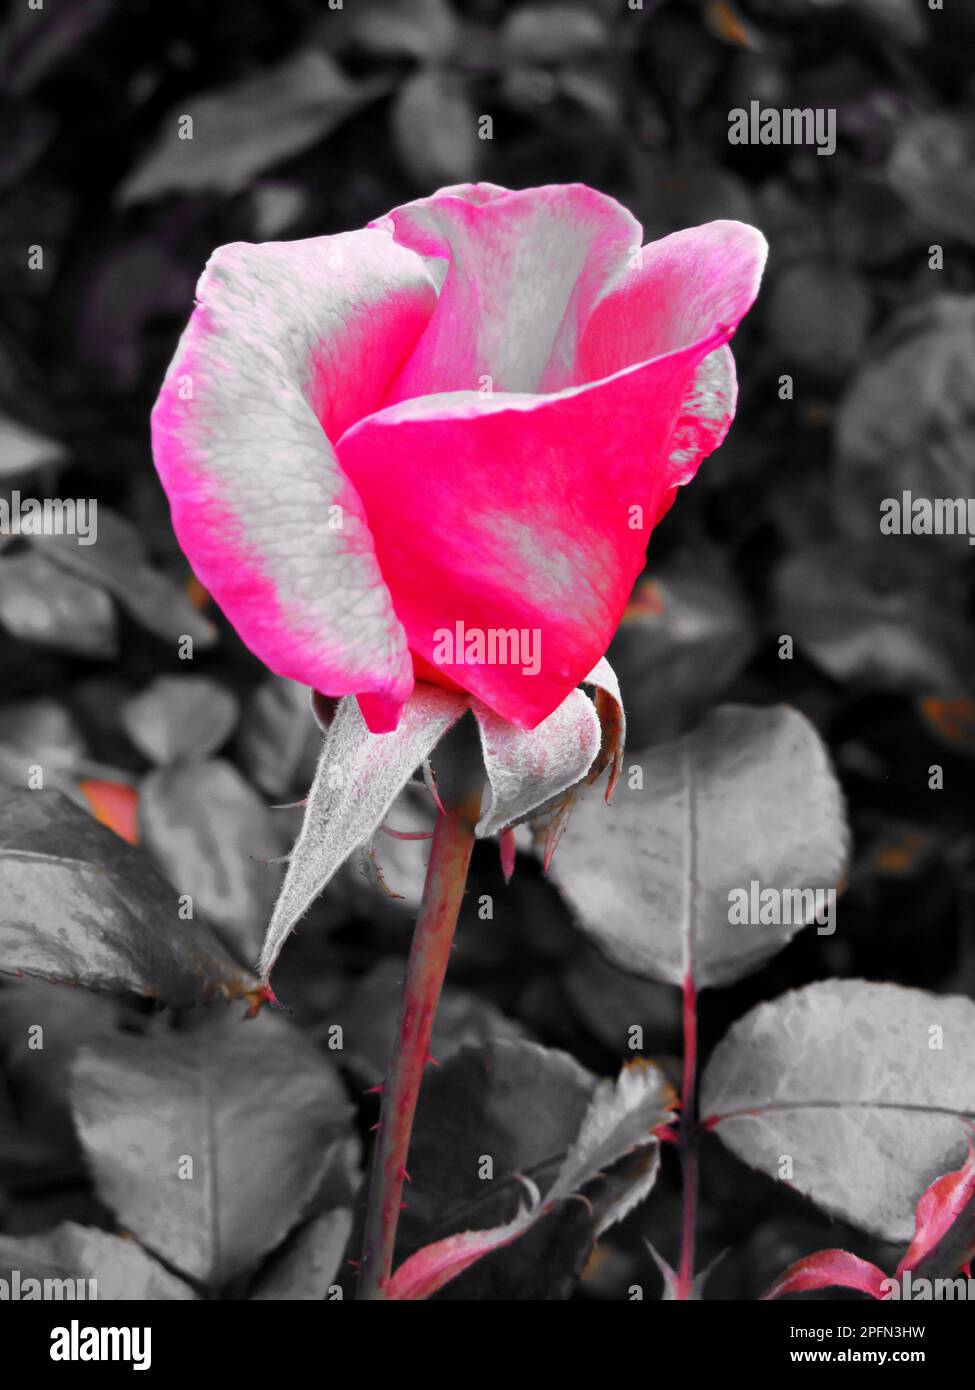 Pink Rose bud, photographed using a selective color filter, showing only pink with the rest of the area in Black and White. Stock Photo